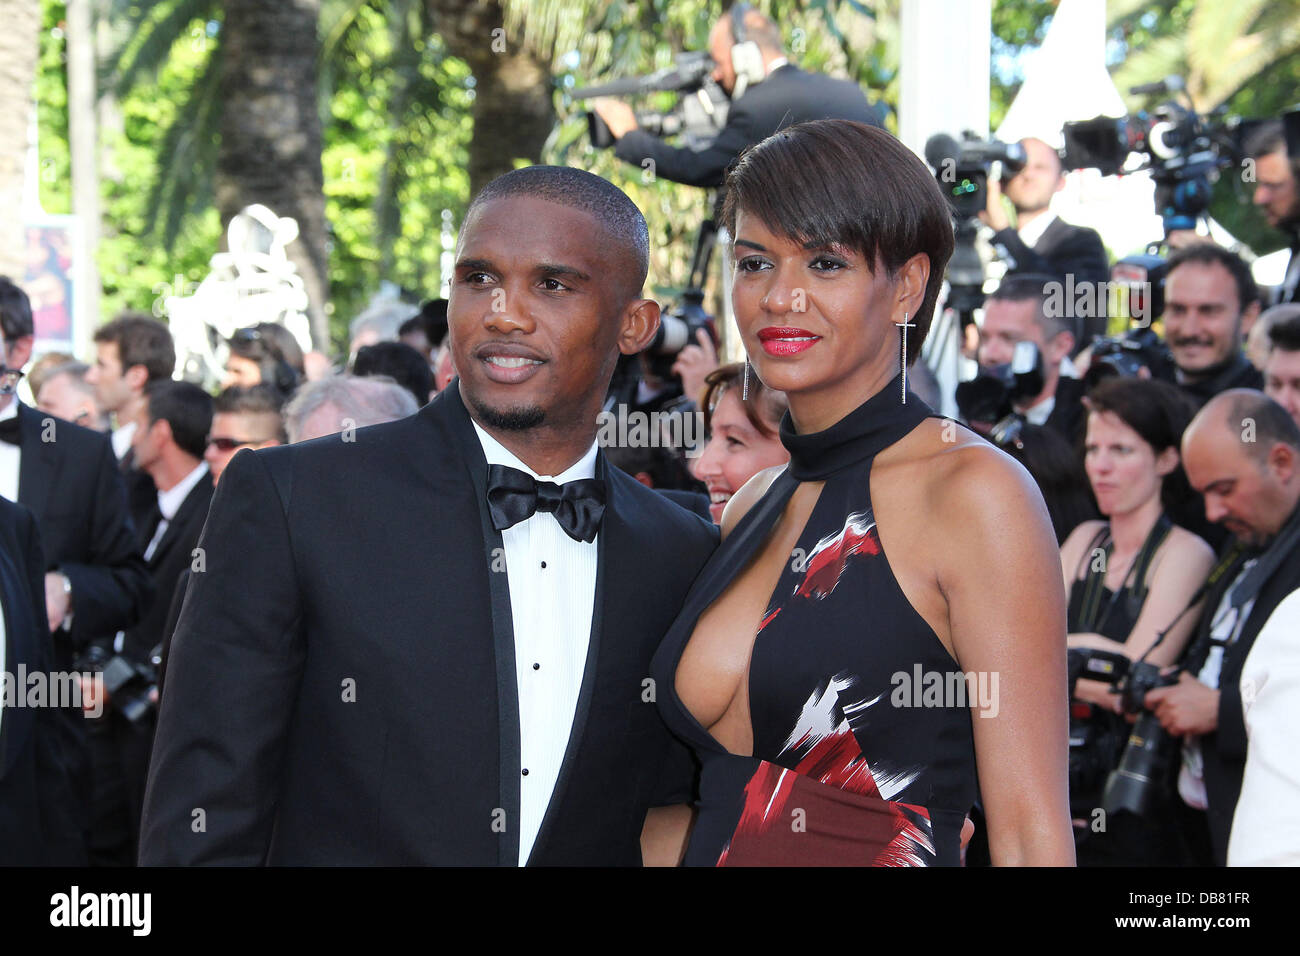 Football player Samuel Eto'o and his wife Georgette, 2011 Cannes International Film Festival - Day 6 - The Tree of Life - Premiere - Departures Cannes, France - 16.05.11  Stock Photo